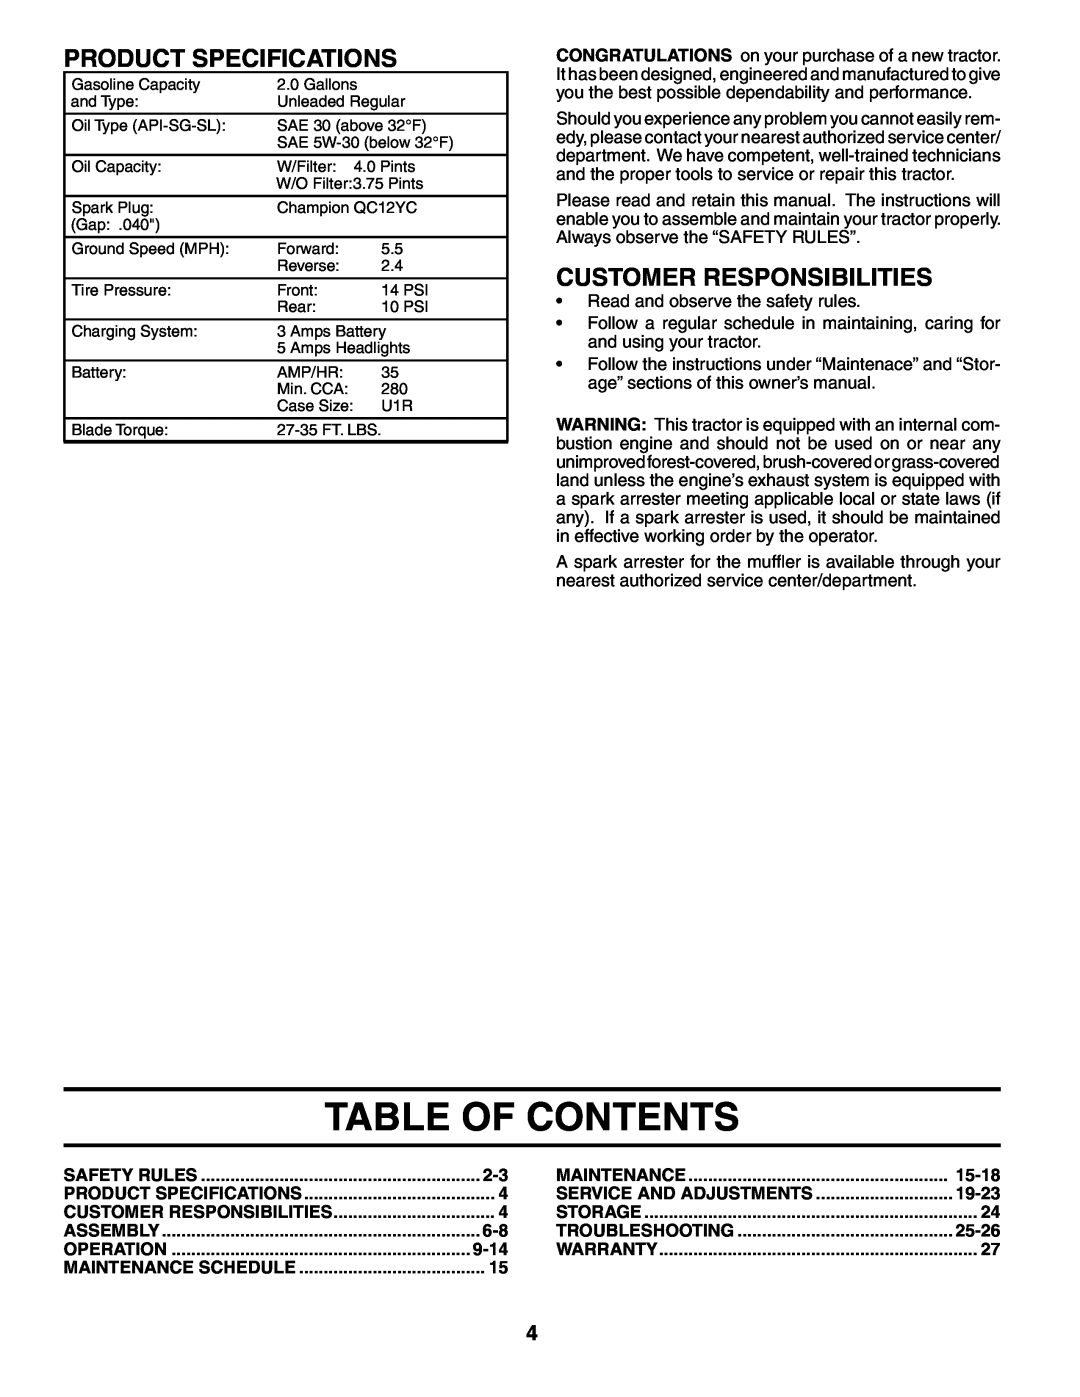 Poulan HD21H42 manual Table Of Contents, Product Specifications, Customer Responsibilities 